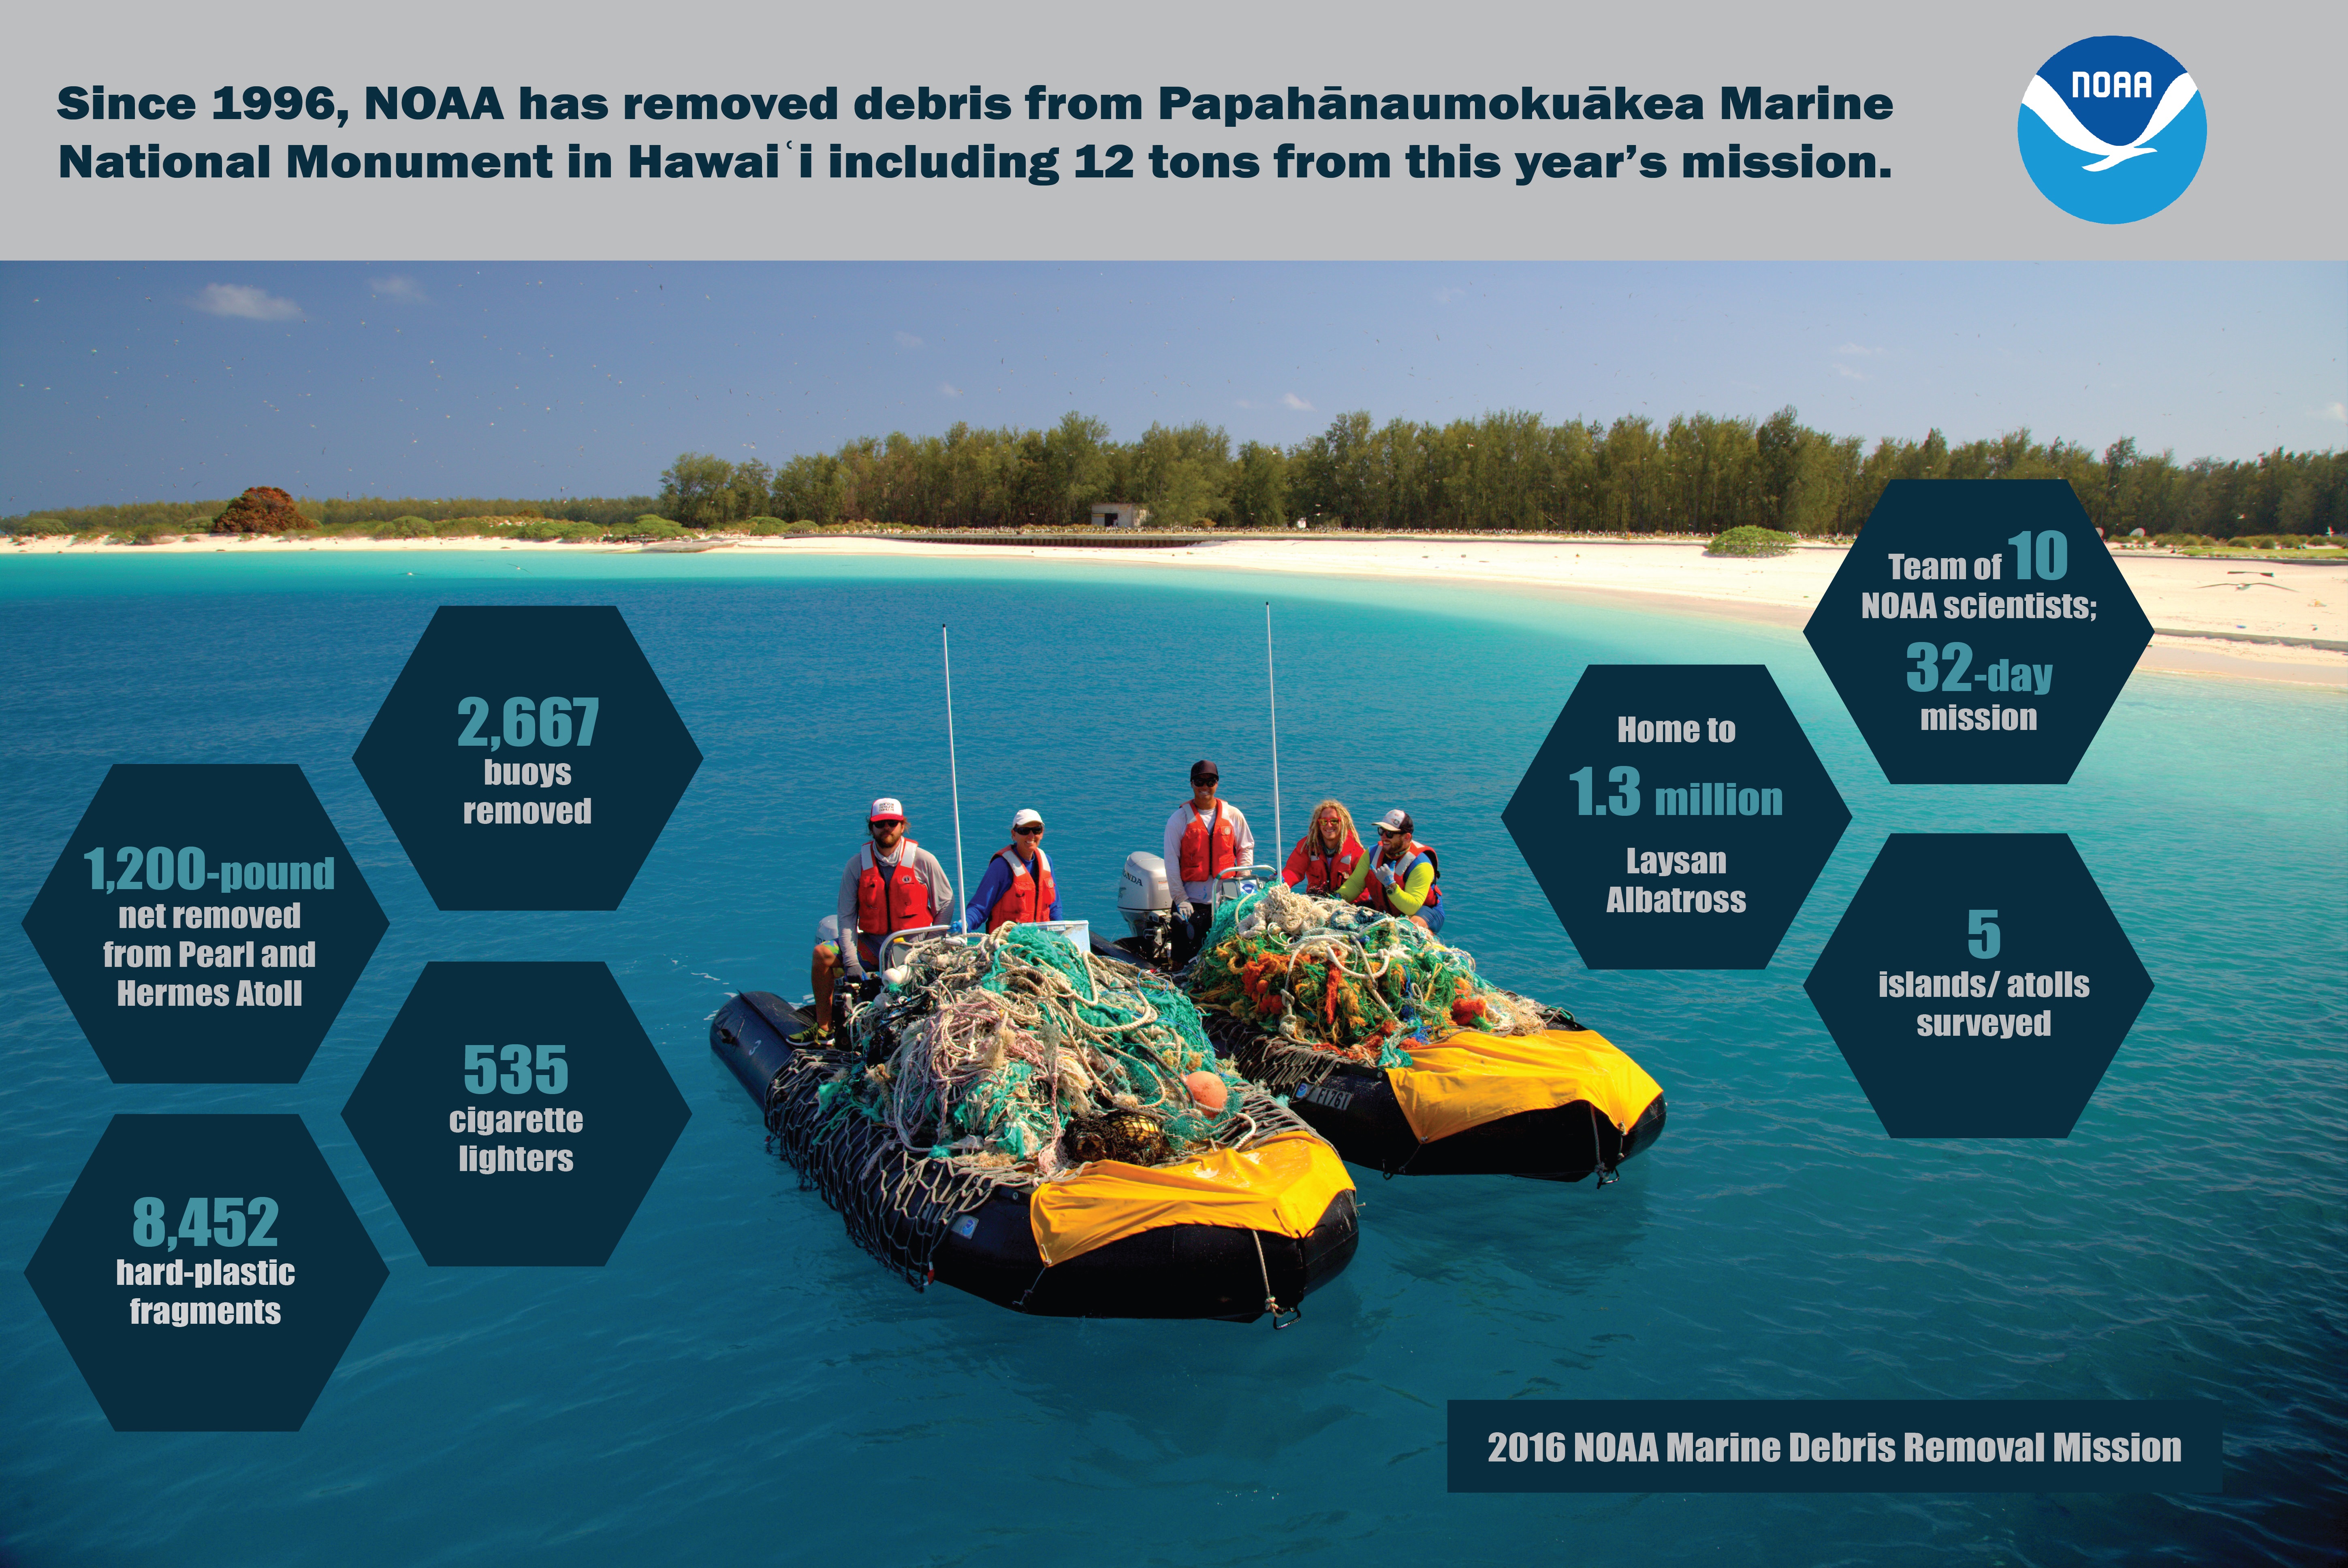 Since 1996, NOAA has removed marine debris from Papahānaumokuākea Marine National Monument in Hawaii, including 12 tons from this year's mission. (NOAA)